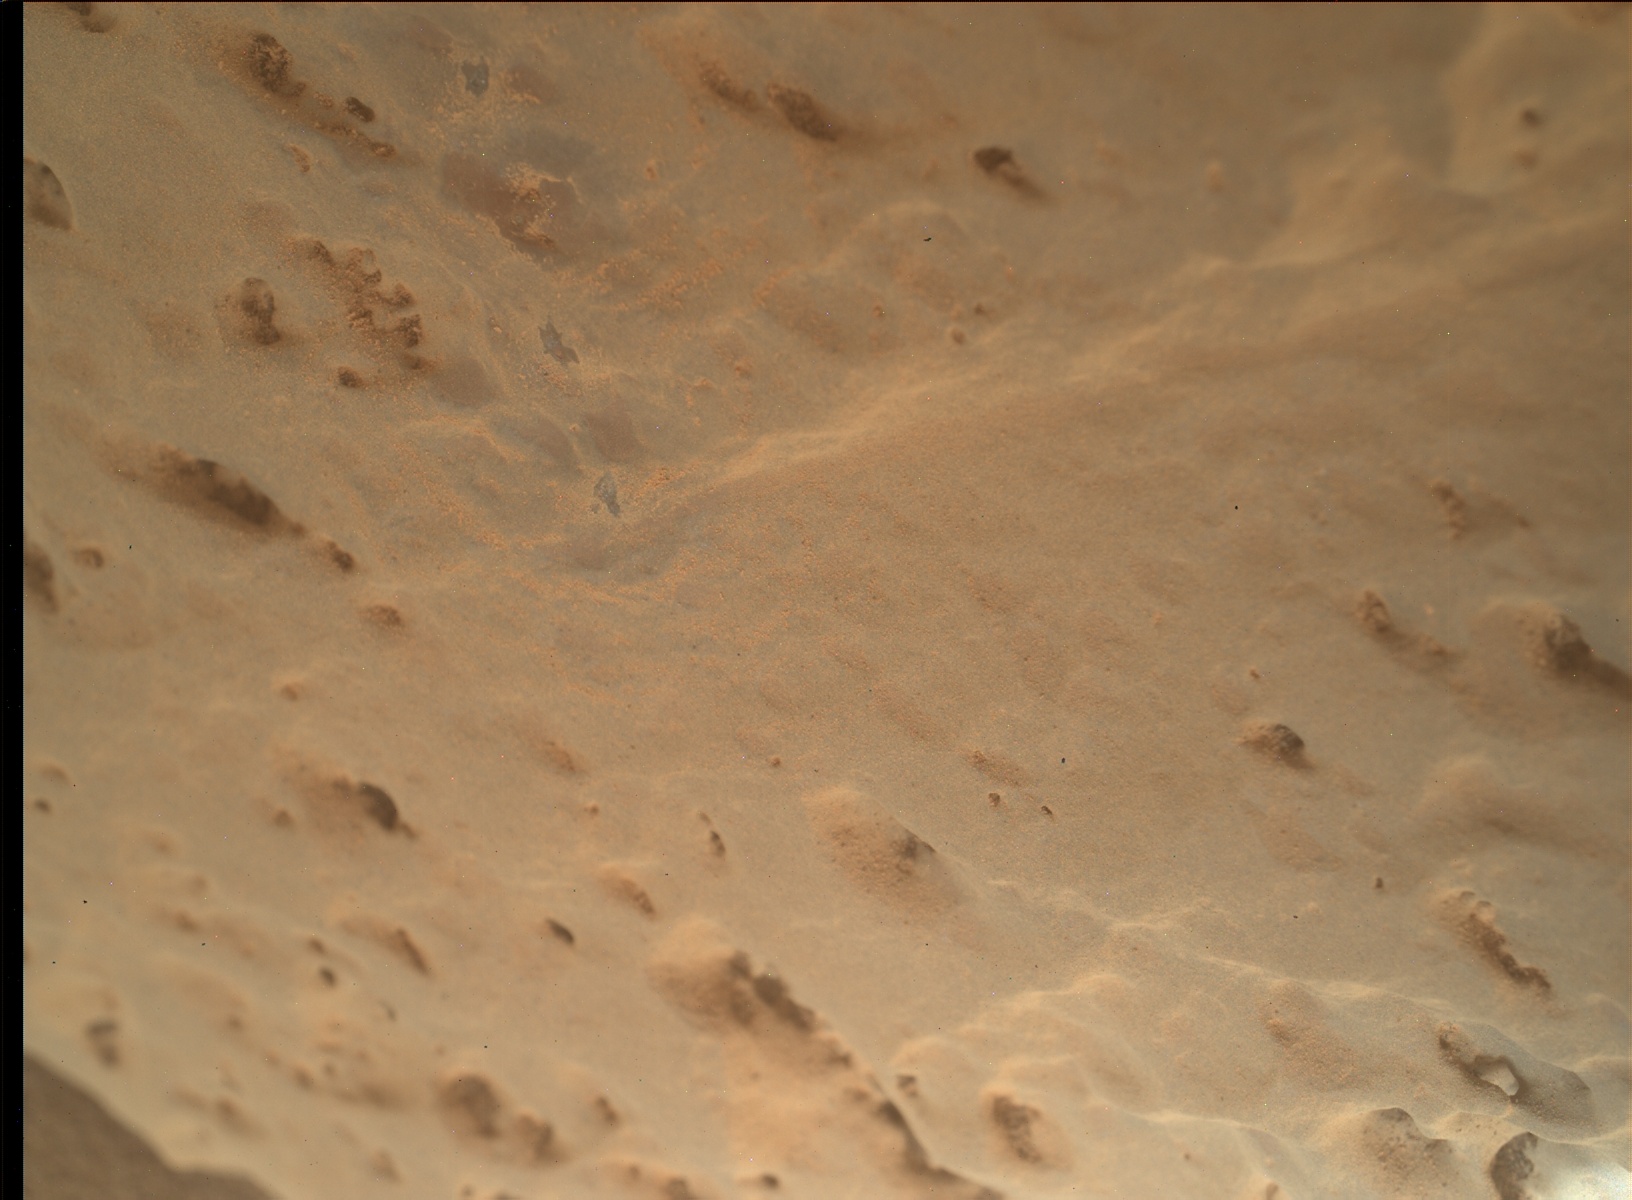 Nasa's Mars rover Curiosity acquired this image using its Mars Hand Lens Imager (MAHLI) on Sol 3746